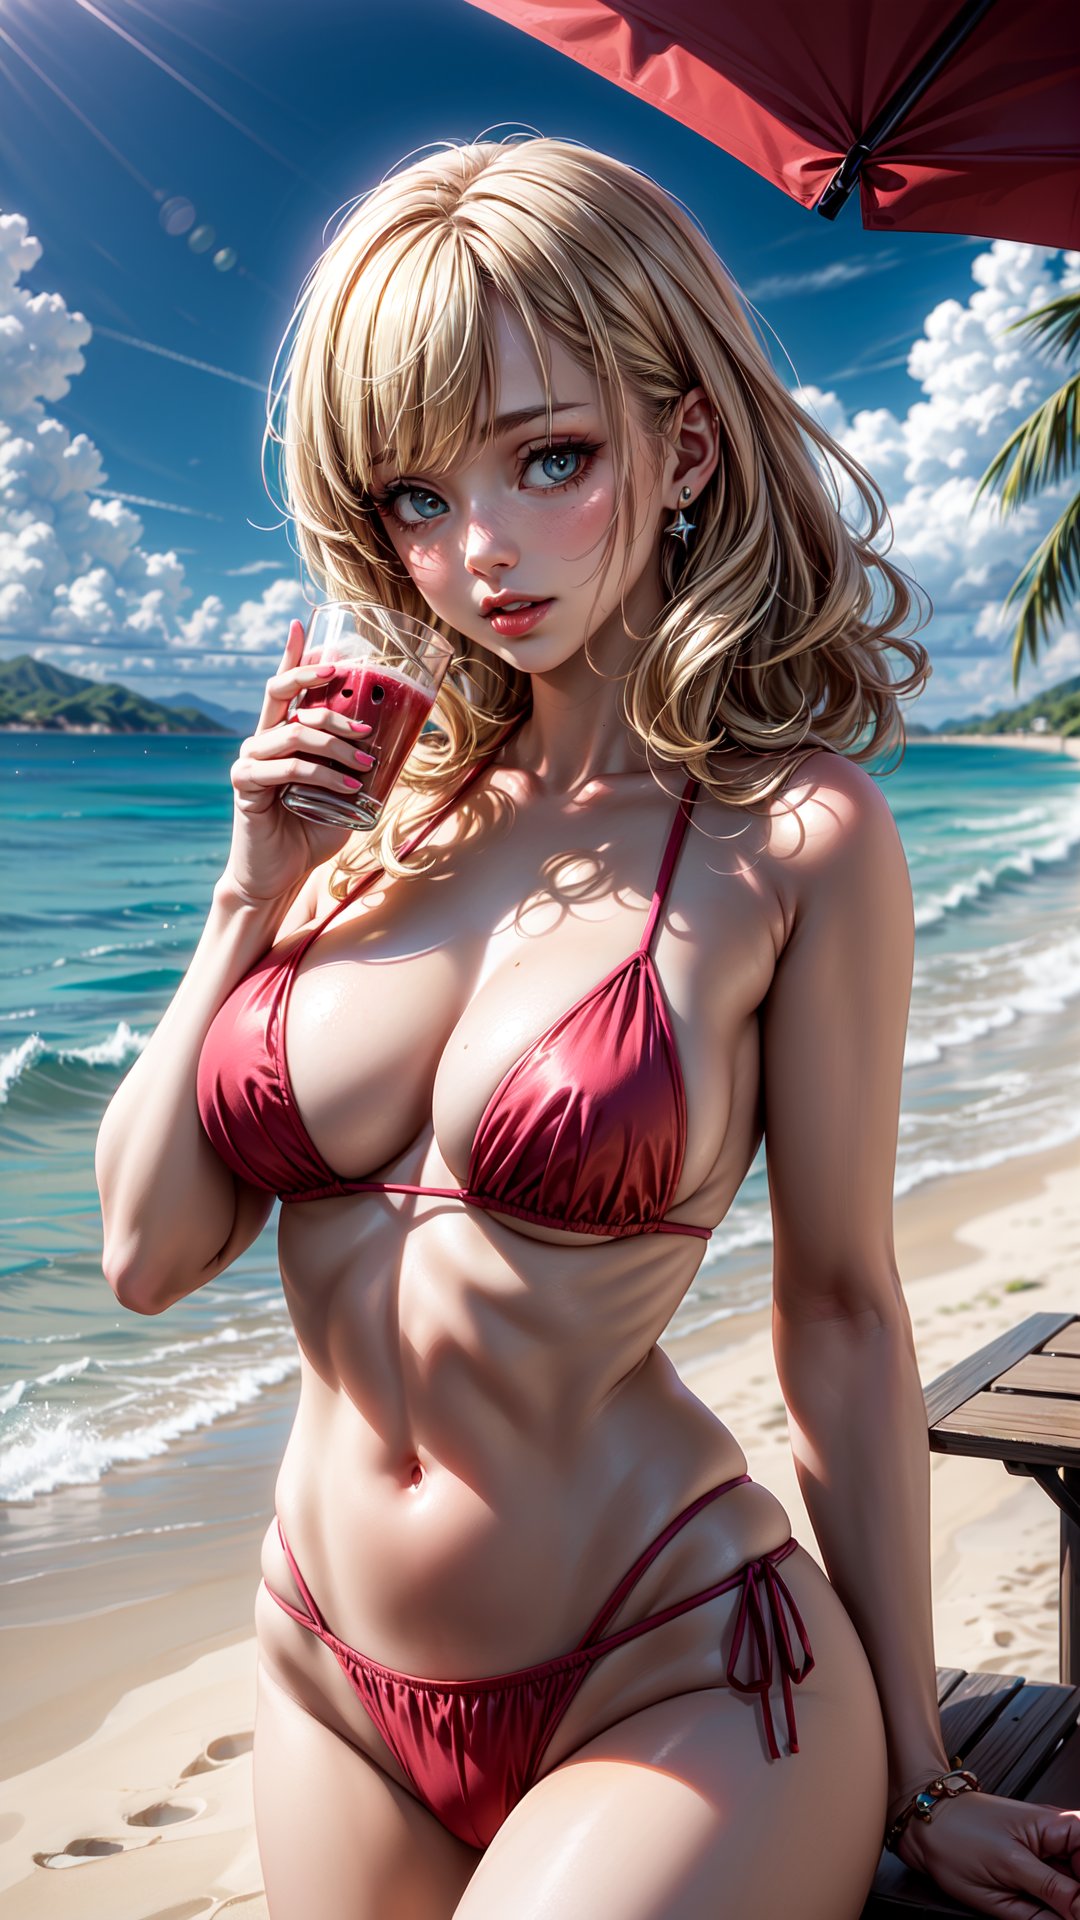 Imagine a sun-kissed beach scene, where azure waves gently caress the shore and golden sands stretch as far as the eye can see. Amidst the rhythmic sounds of the ocean, envision a young woman with cascading blonde, curly hair, dressed in a vibrant beachwear ensemble dominated by shades of pink. She holds a refreshing juice in hand, its vivid colors mirroring the tropical surroundings. Capture the joyous moment as she takes a sip, the fruity aroma mingling with the salty sea breeze. Dive into the details of her attire, the way the pink hues complement the azure backdrop, and how her carefree spirit harmonizes with the soothing rhythm of the waves. Transport yourself to this sunlit haven where the beach and the woman in pink create a picturesque symphony of leisure and tranquility.